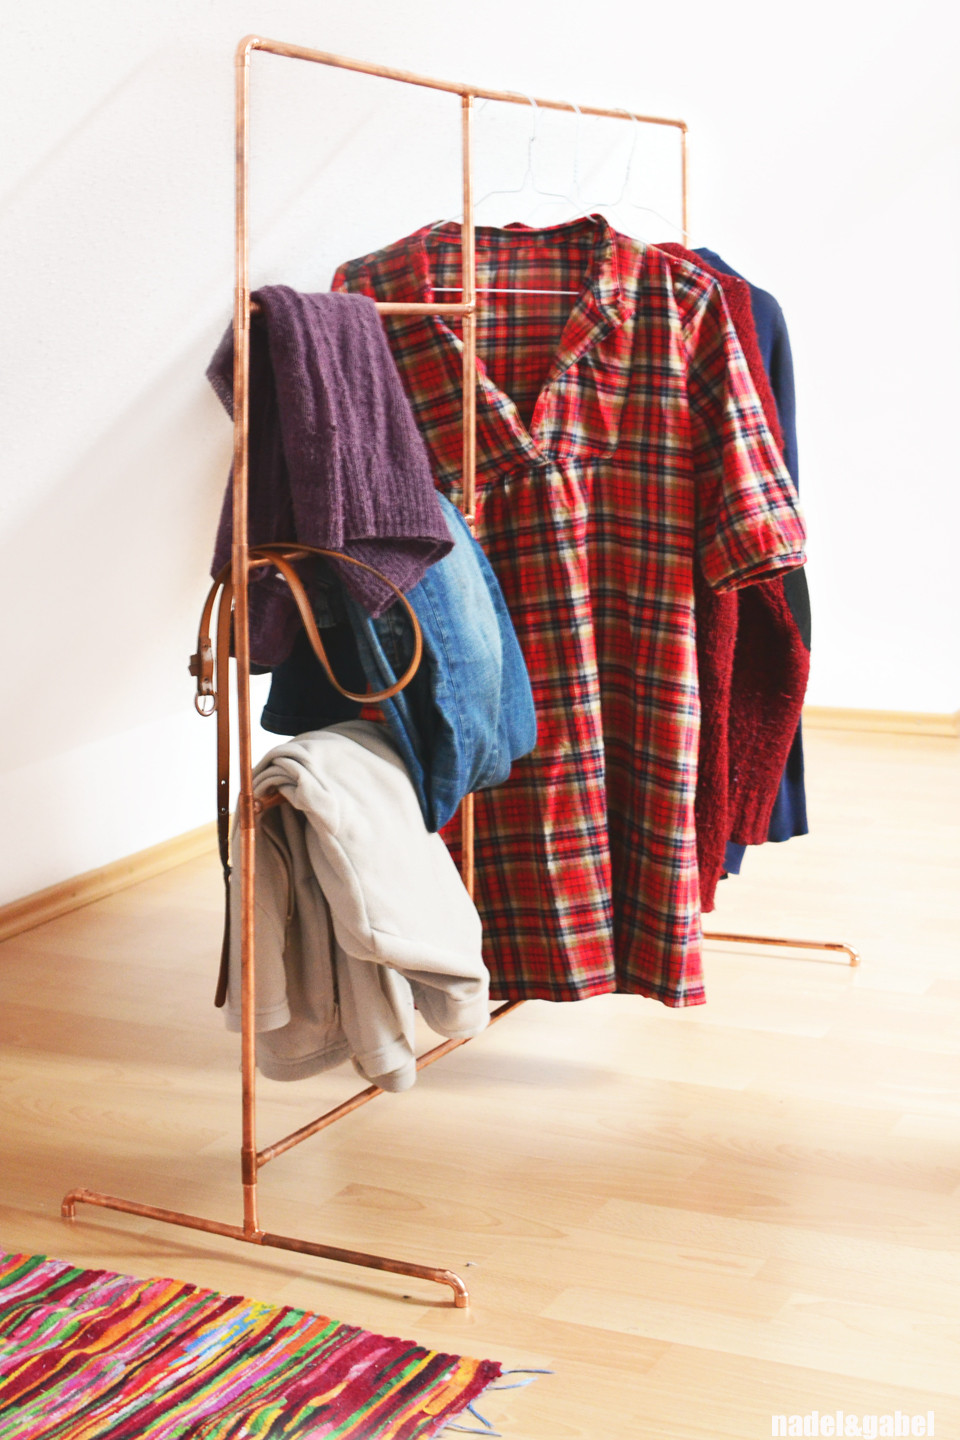 DIY Pipe Clothes Rack
 Copper – DIY clothes rack from copper pipes